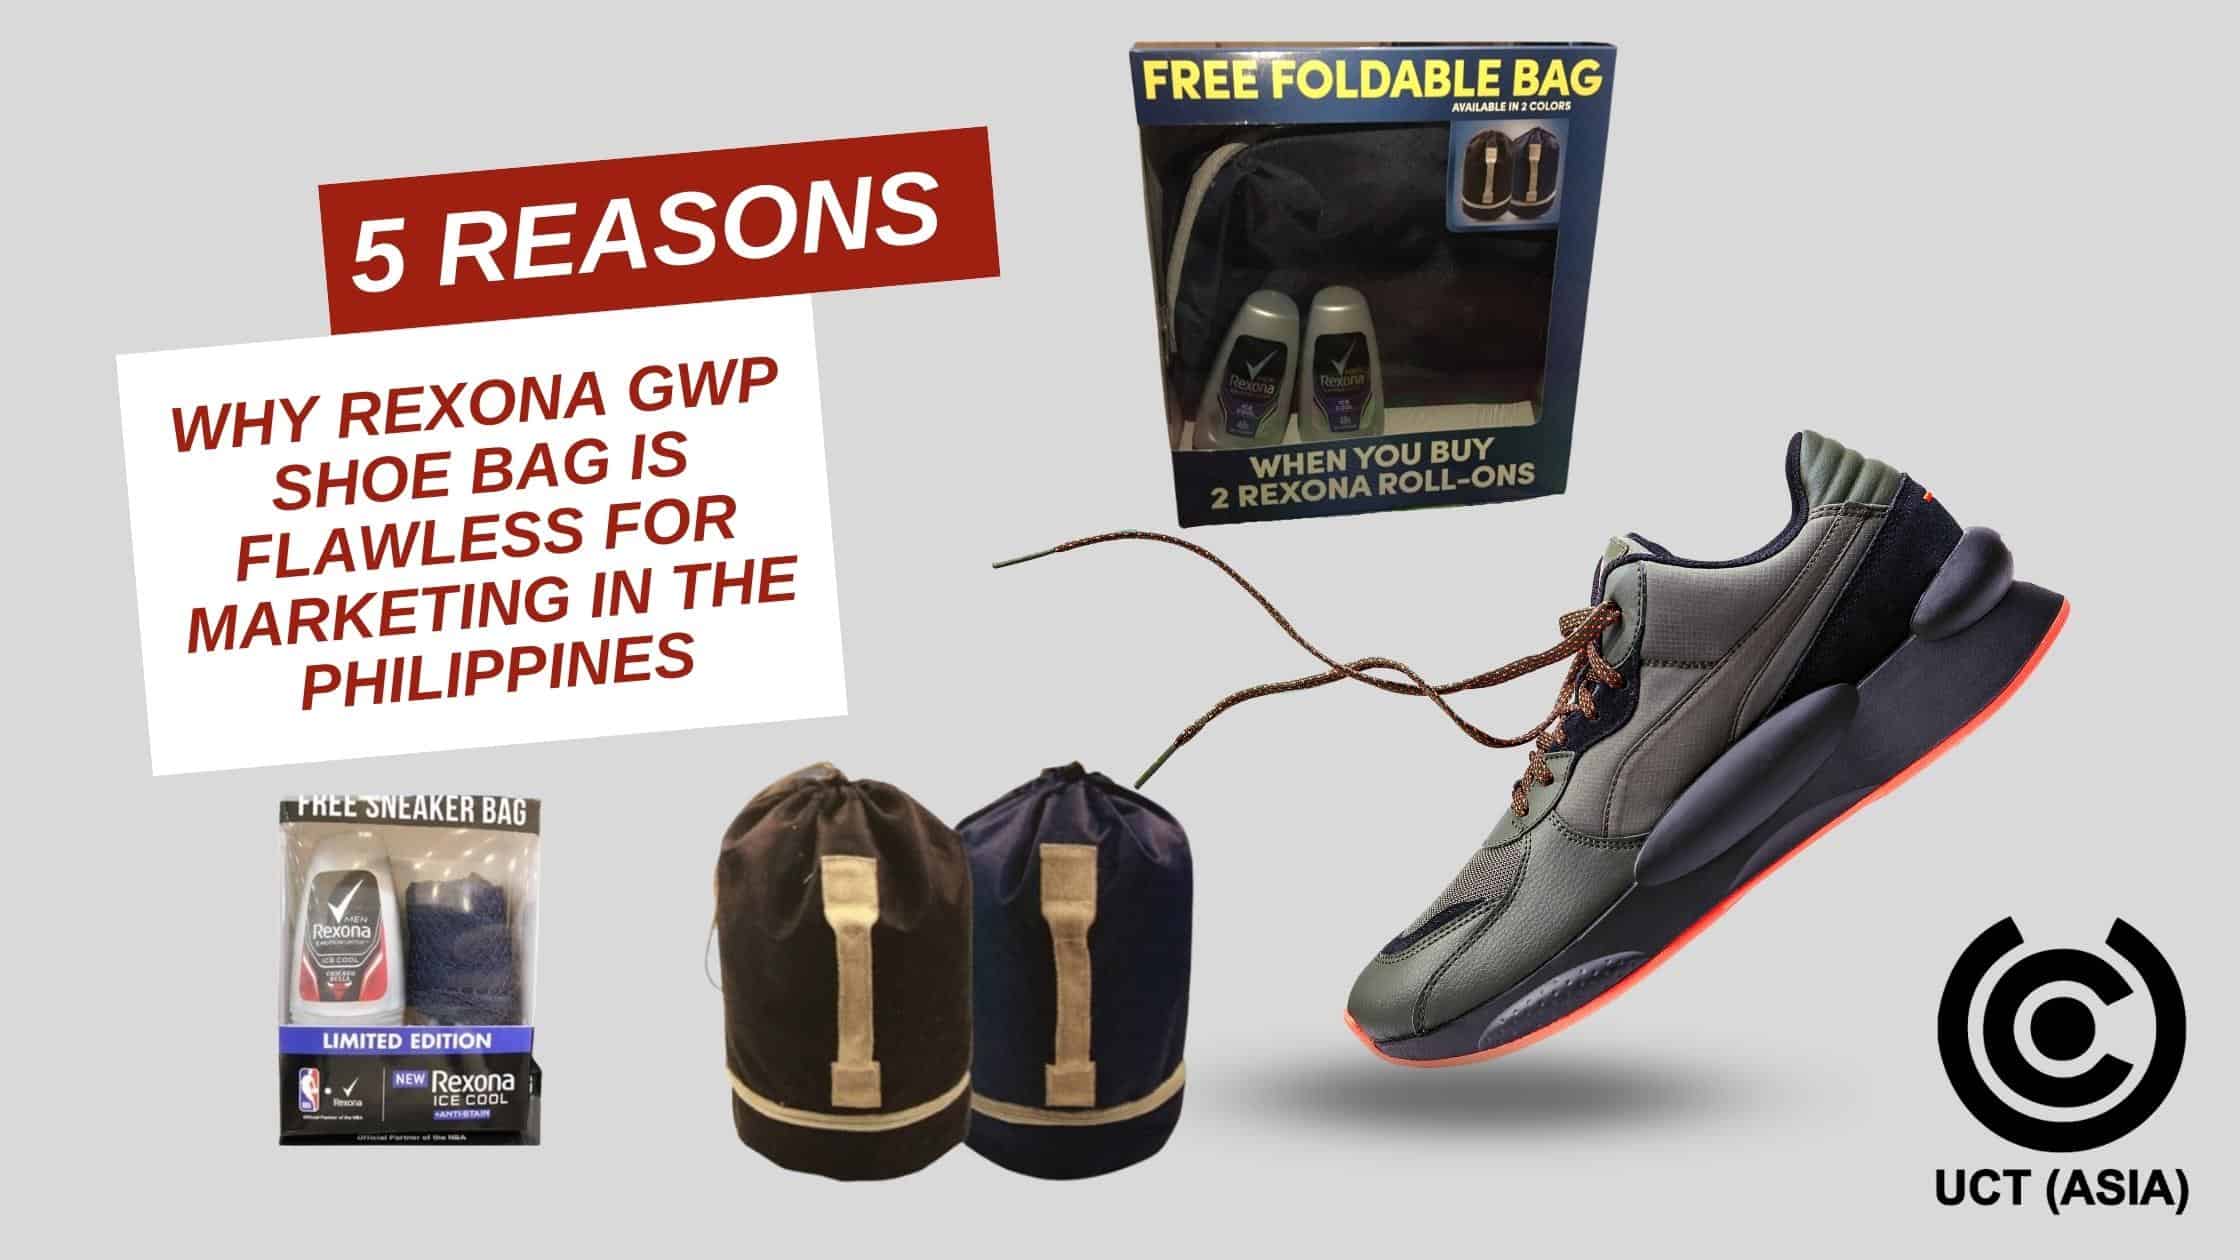 5 reasons why Rexona GWP shoe bag is flawless for marketing In The Philippines